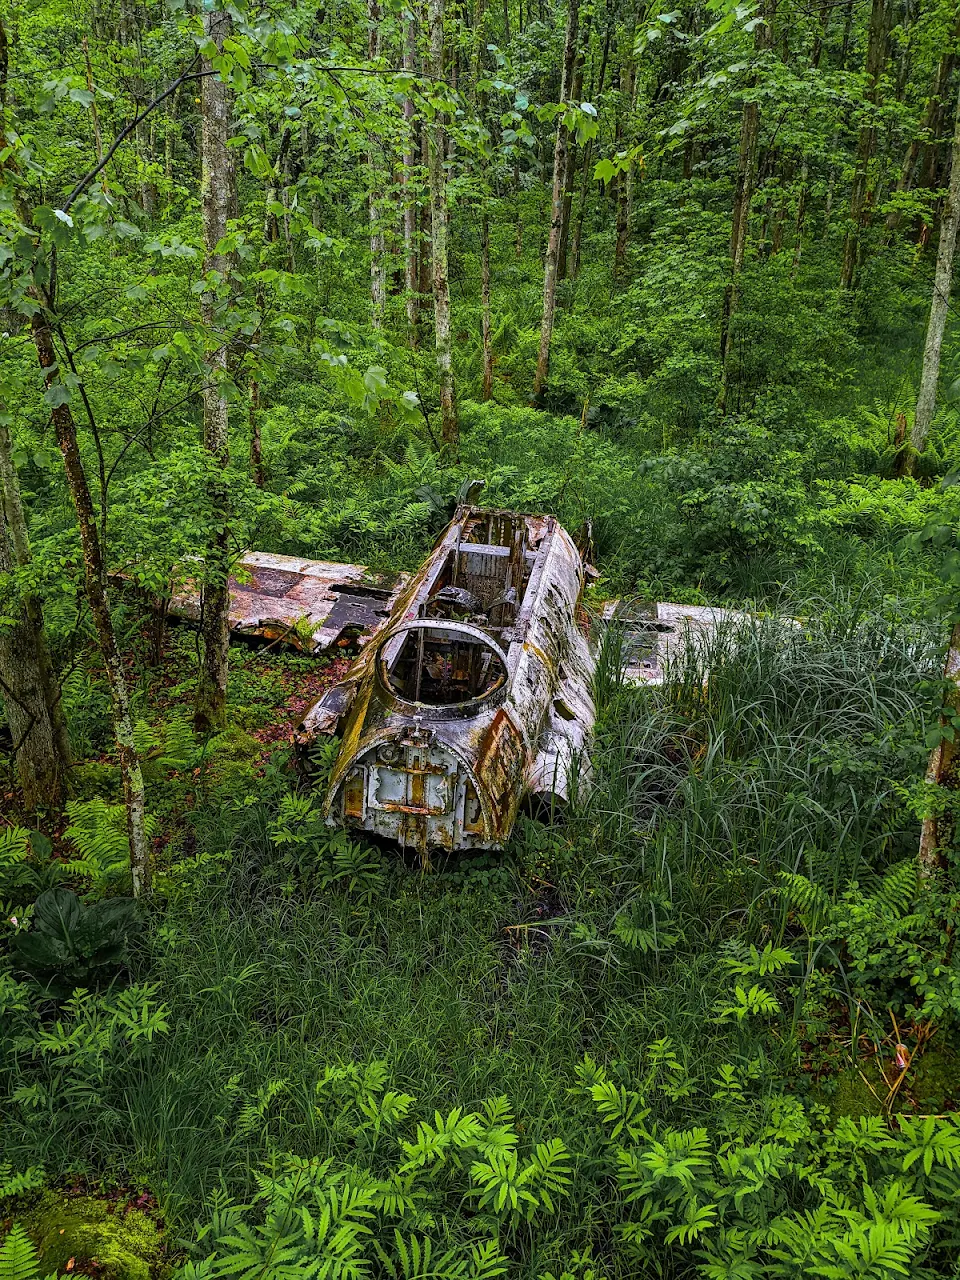 Plane wreck in New Jersey woods [OC]